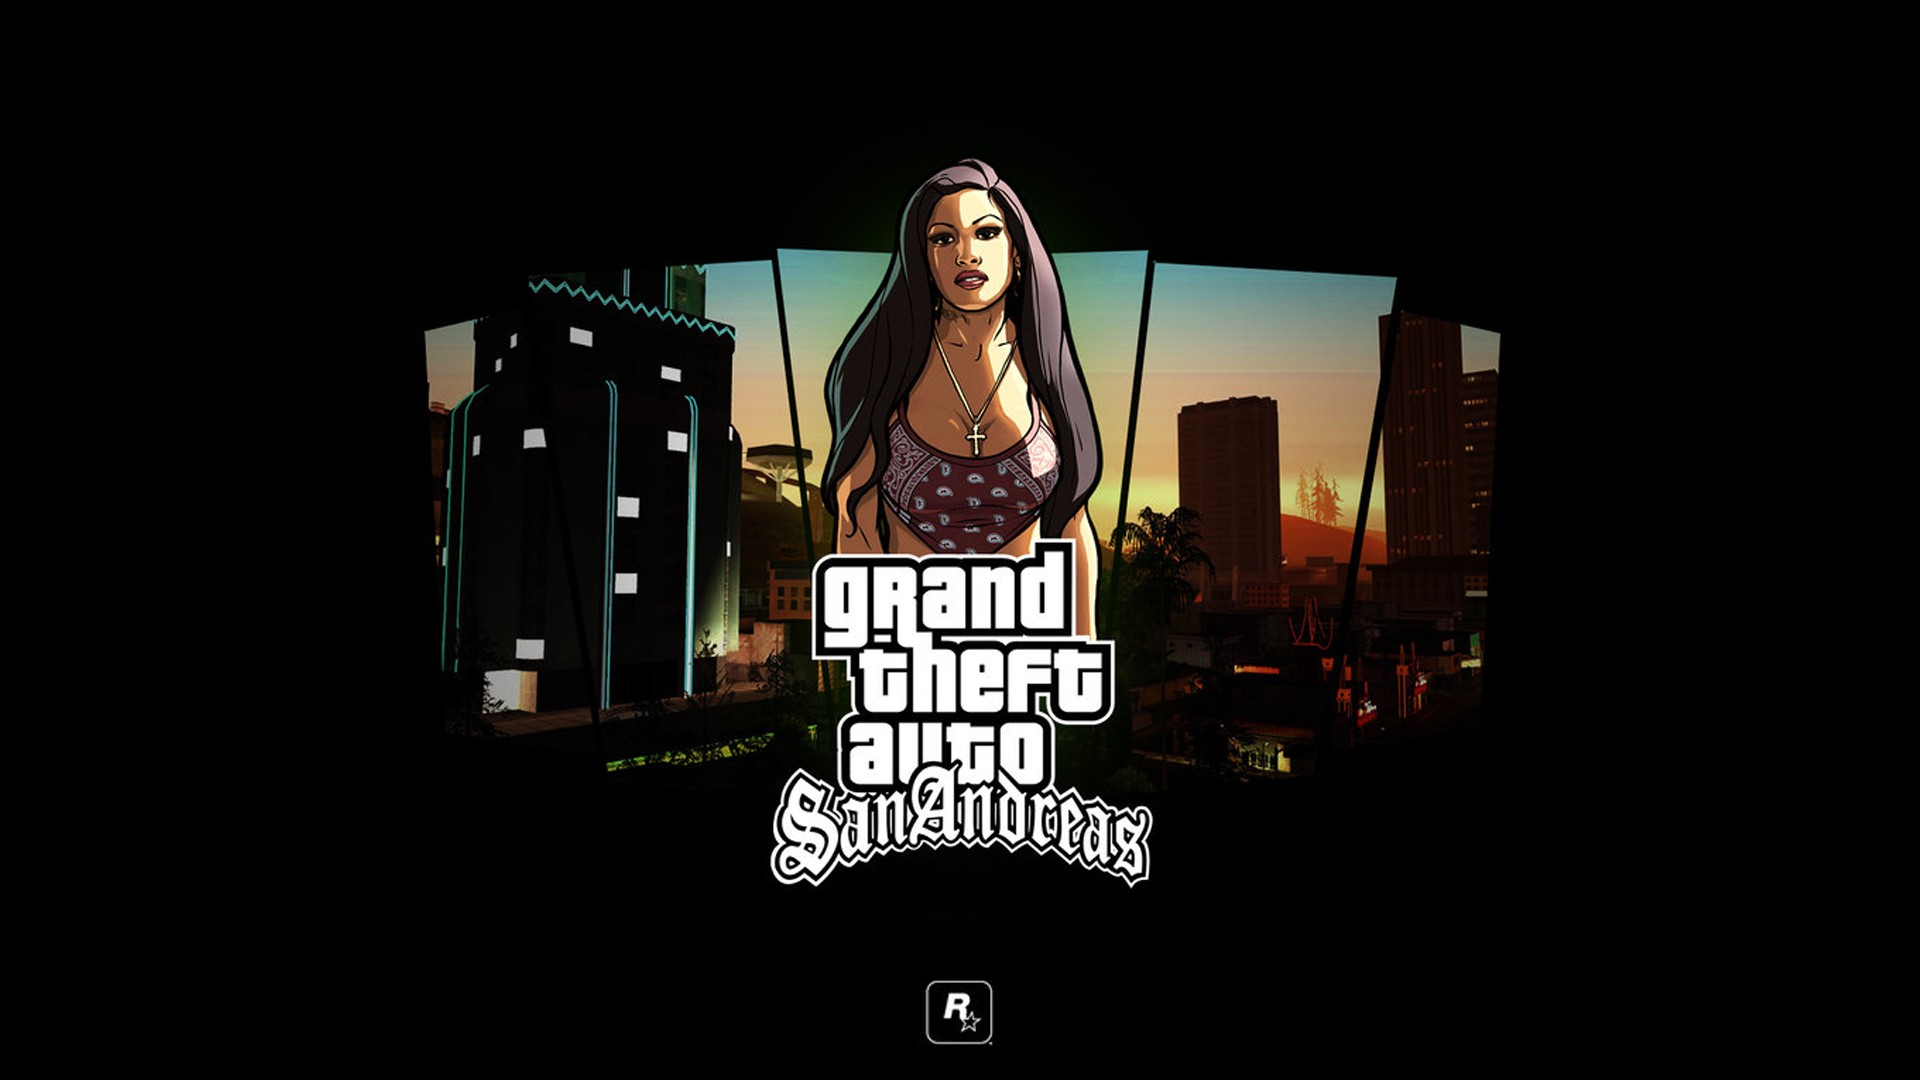 1920x1080 Wallpaper : illustration, video games, Rockstar Games, PlayStation 2, Grand Theft Auto San Andreas, stage, album cover microcosmos 49468 HD Wallpapers